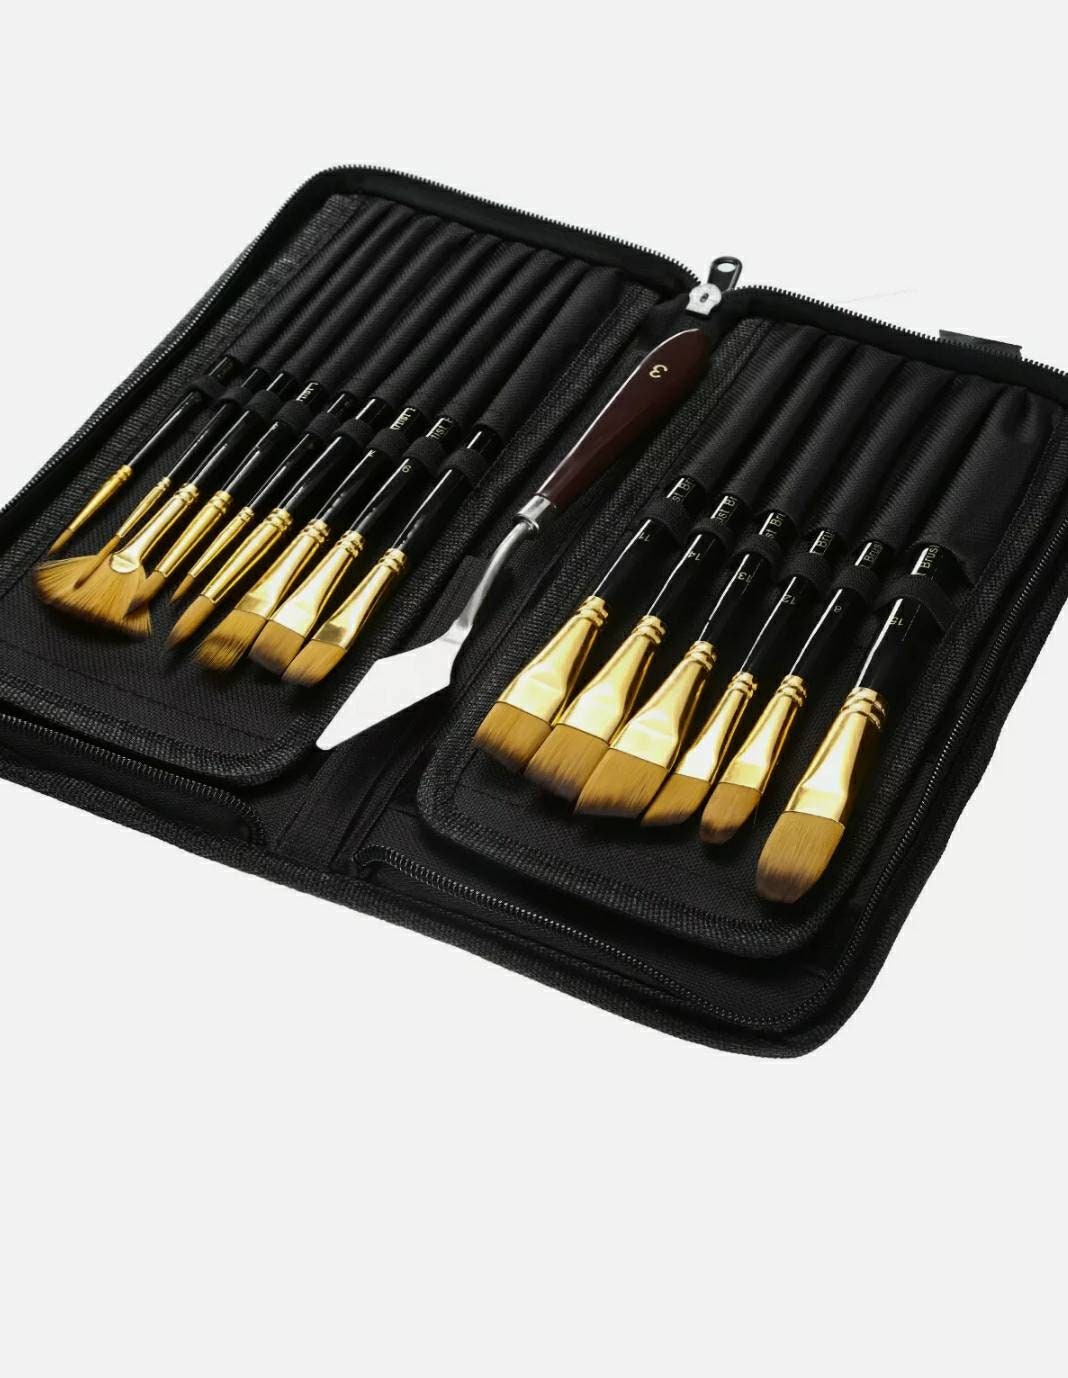 32 Paint Brushes From 7 Series and 1 Pen Holder 